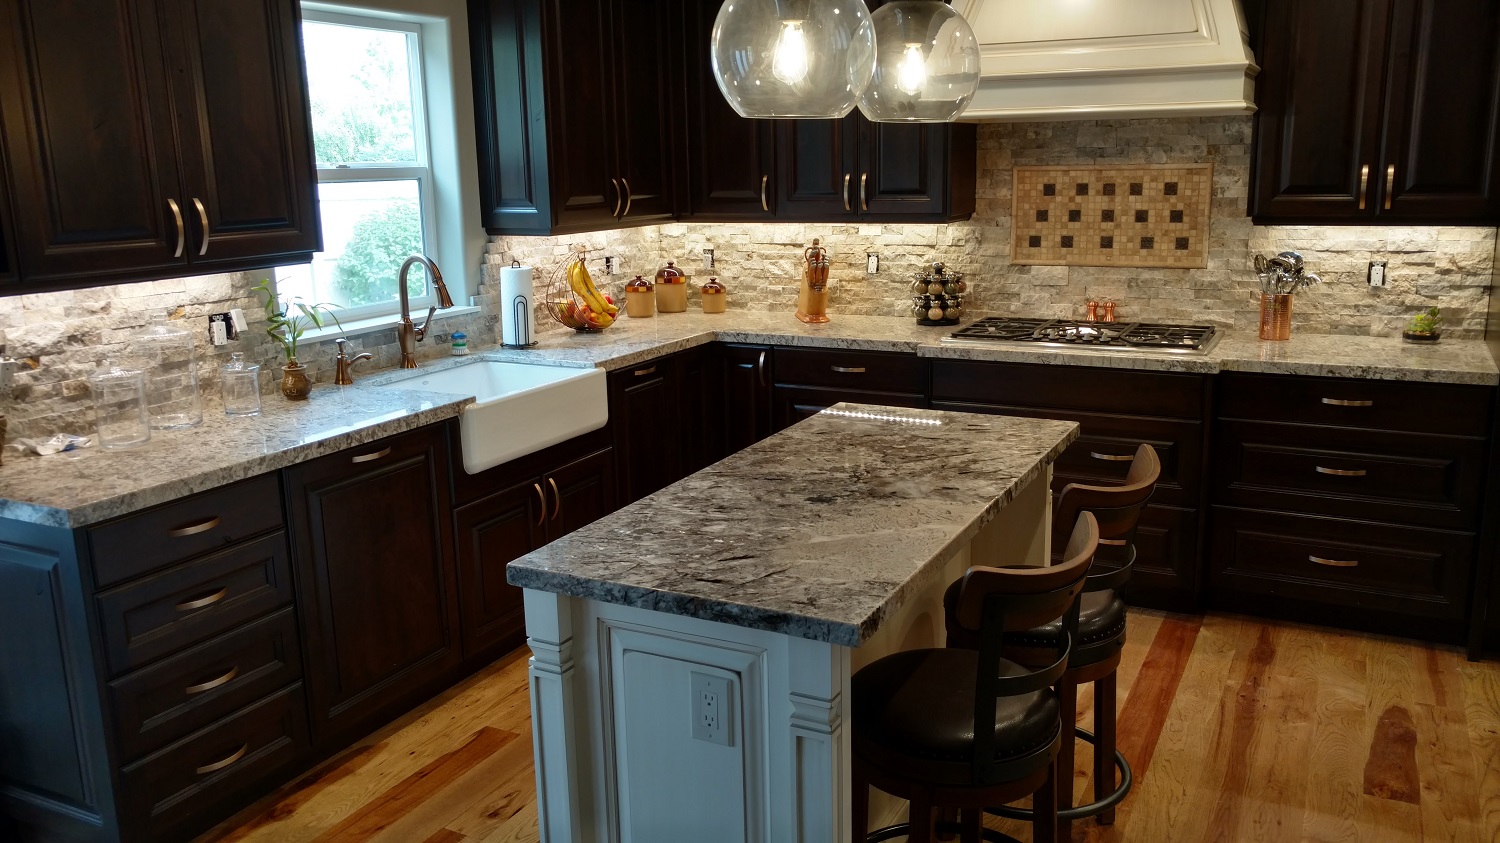 Kitchen Remodeling Contractor Services from Topp Remodeling & Construction